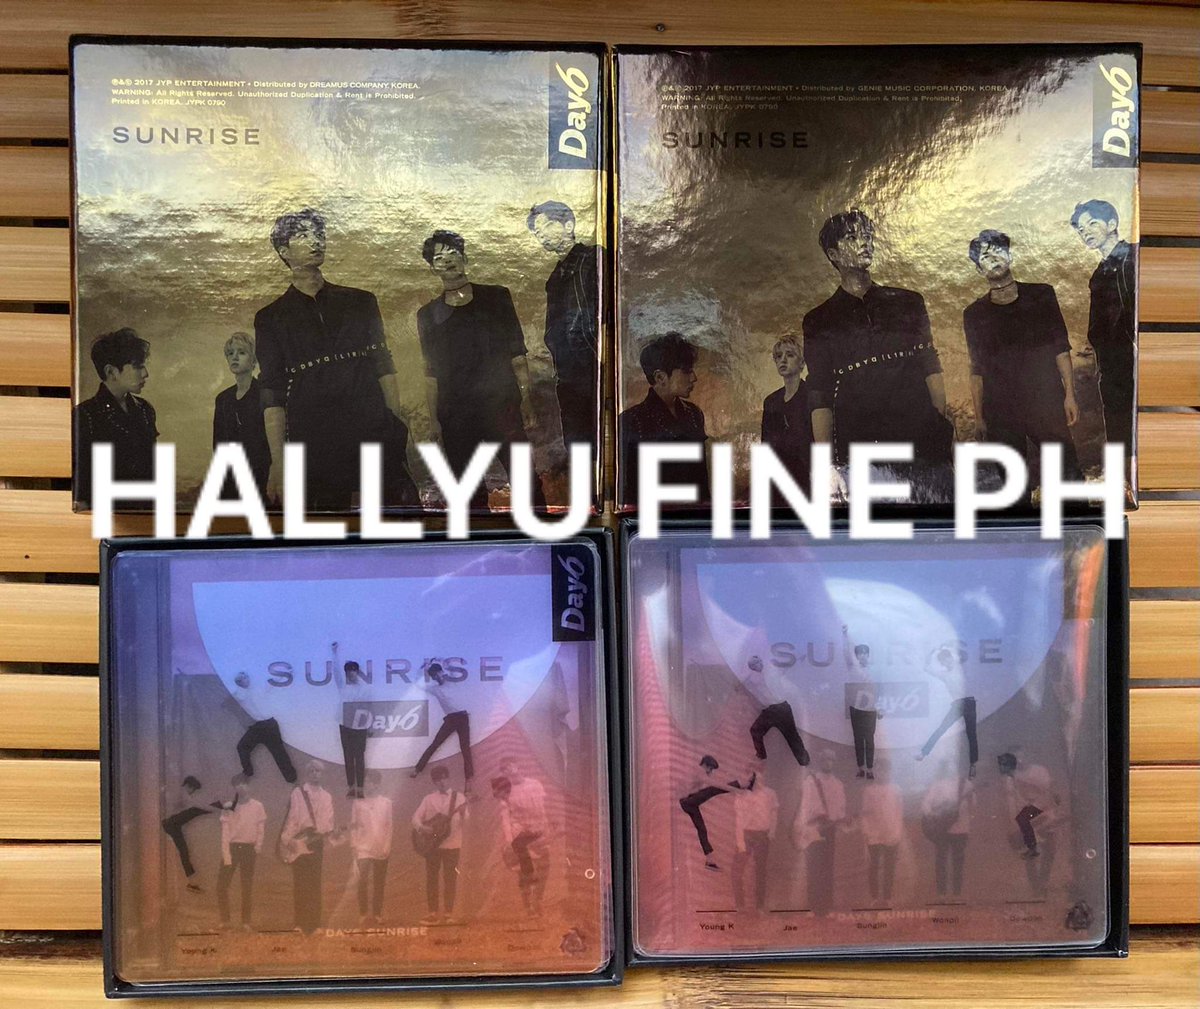  #HFPHOnhand SALEDAY6 Sunrise unsealed P300 + LSFOriginal price: P350Item code: D6-Stags: lfb wts ph only onhand day6